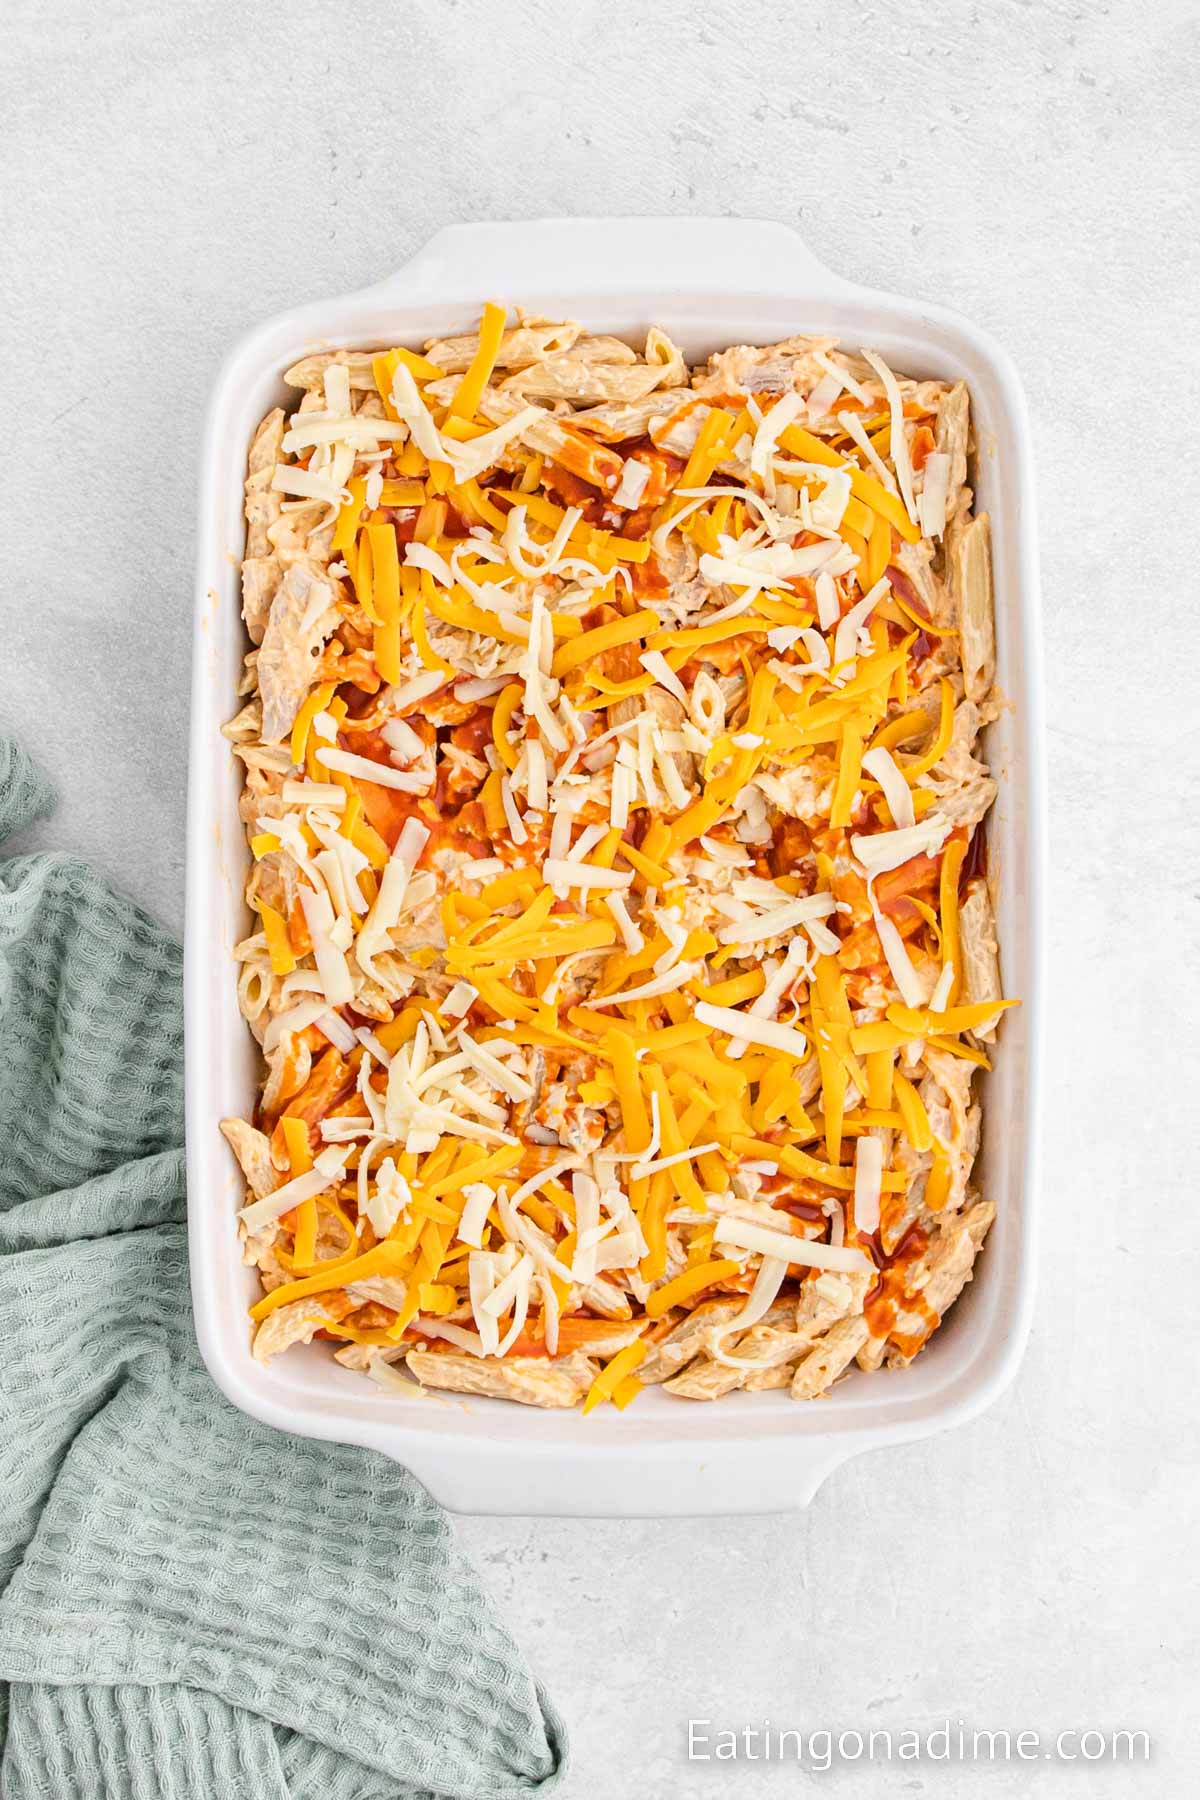 Topping the chicken mixture with shredded cheese